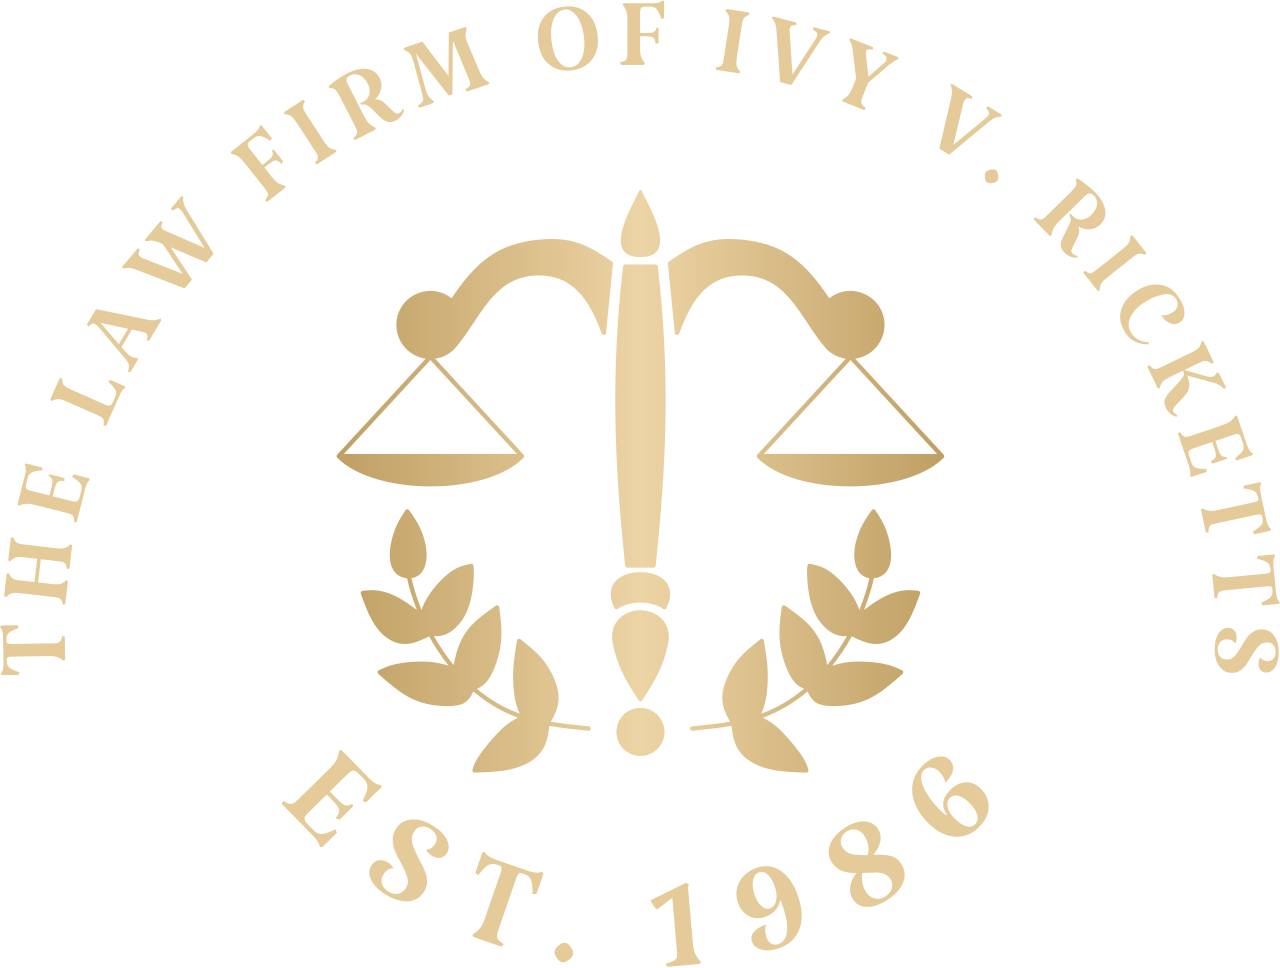 THE LAW FIRM OF IVY V. RICKETTS's logo